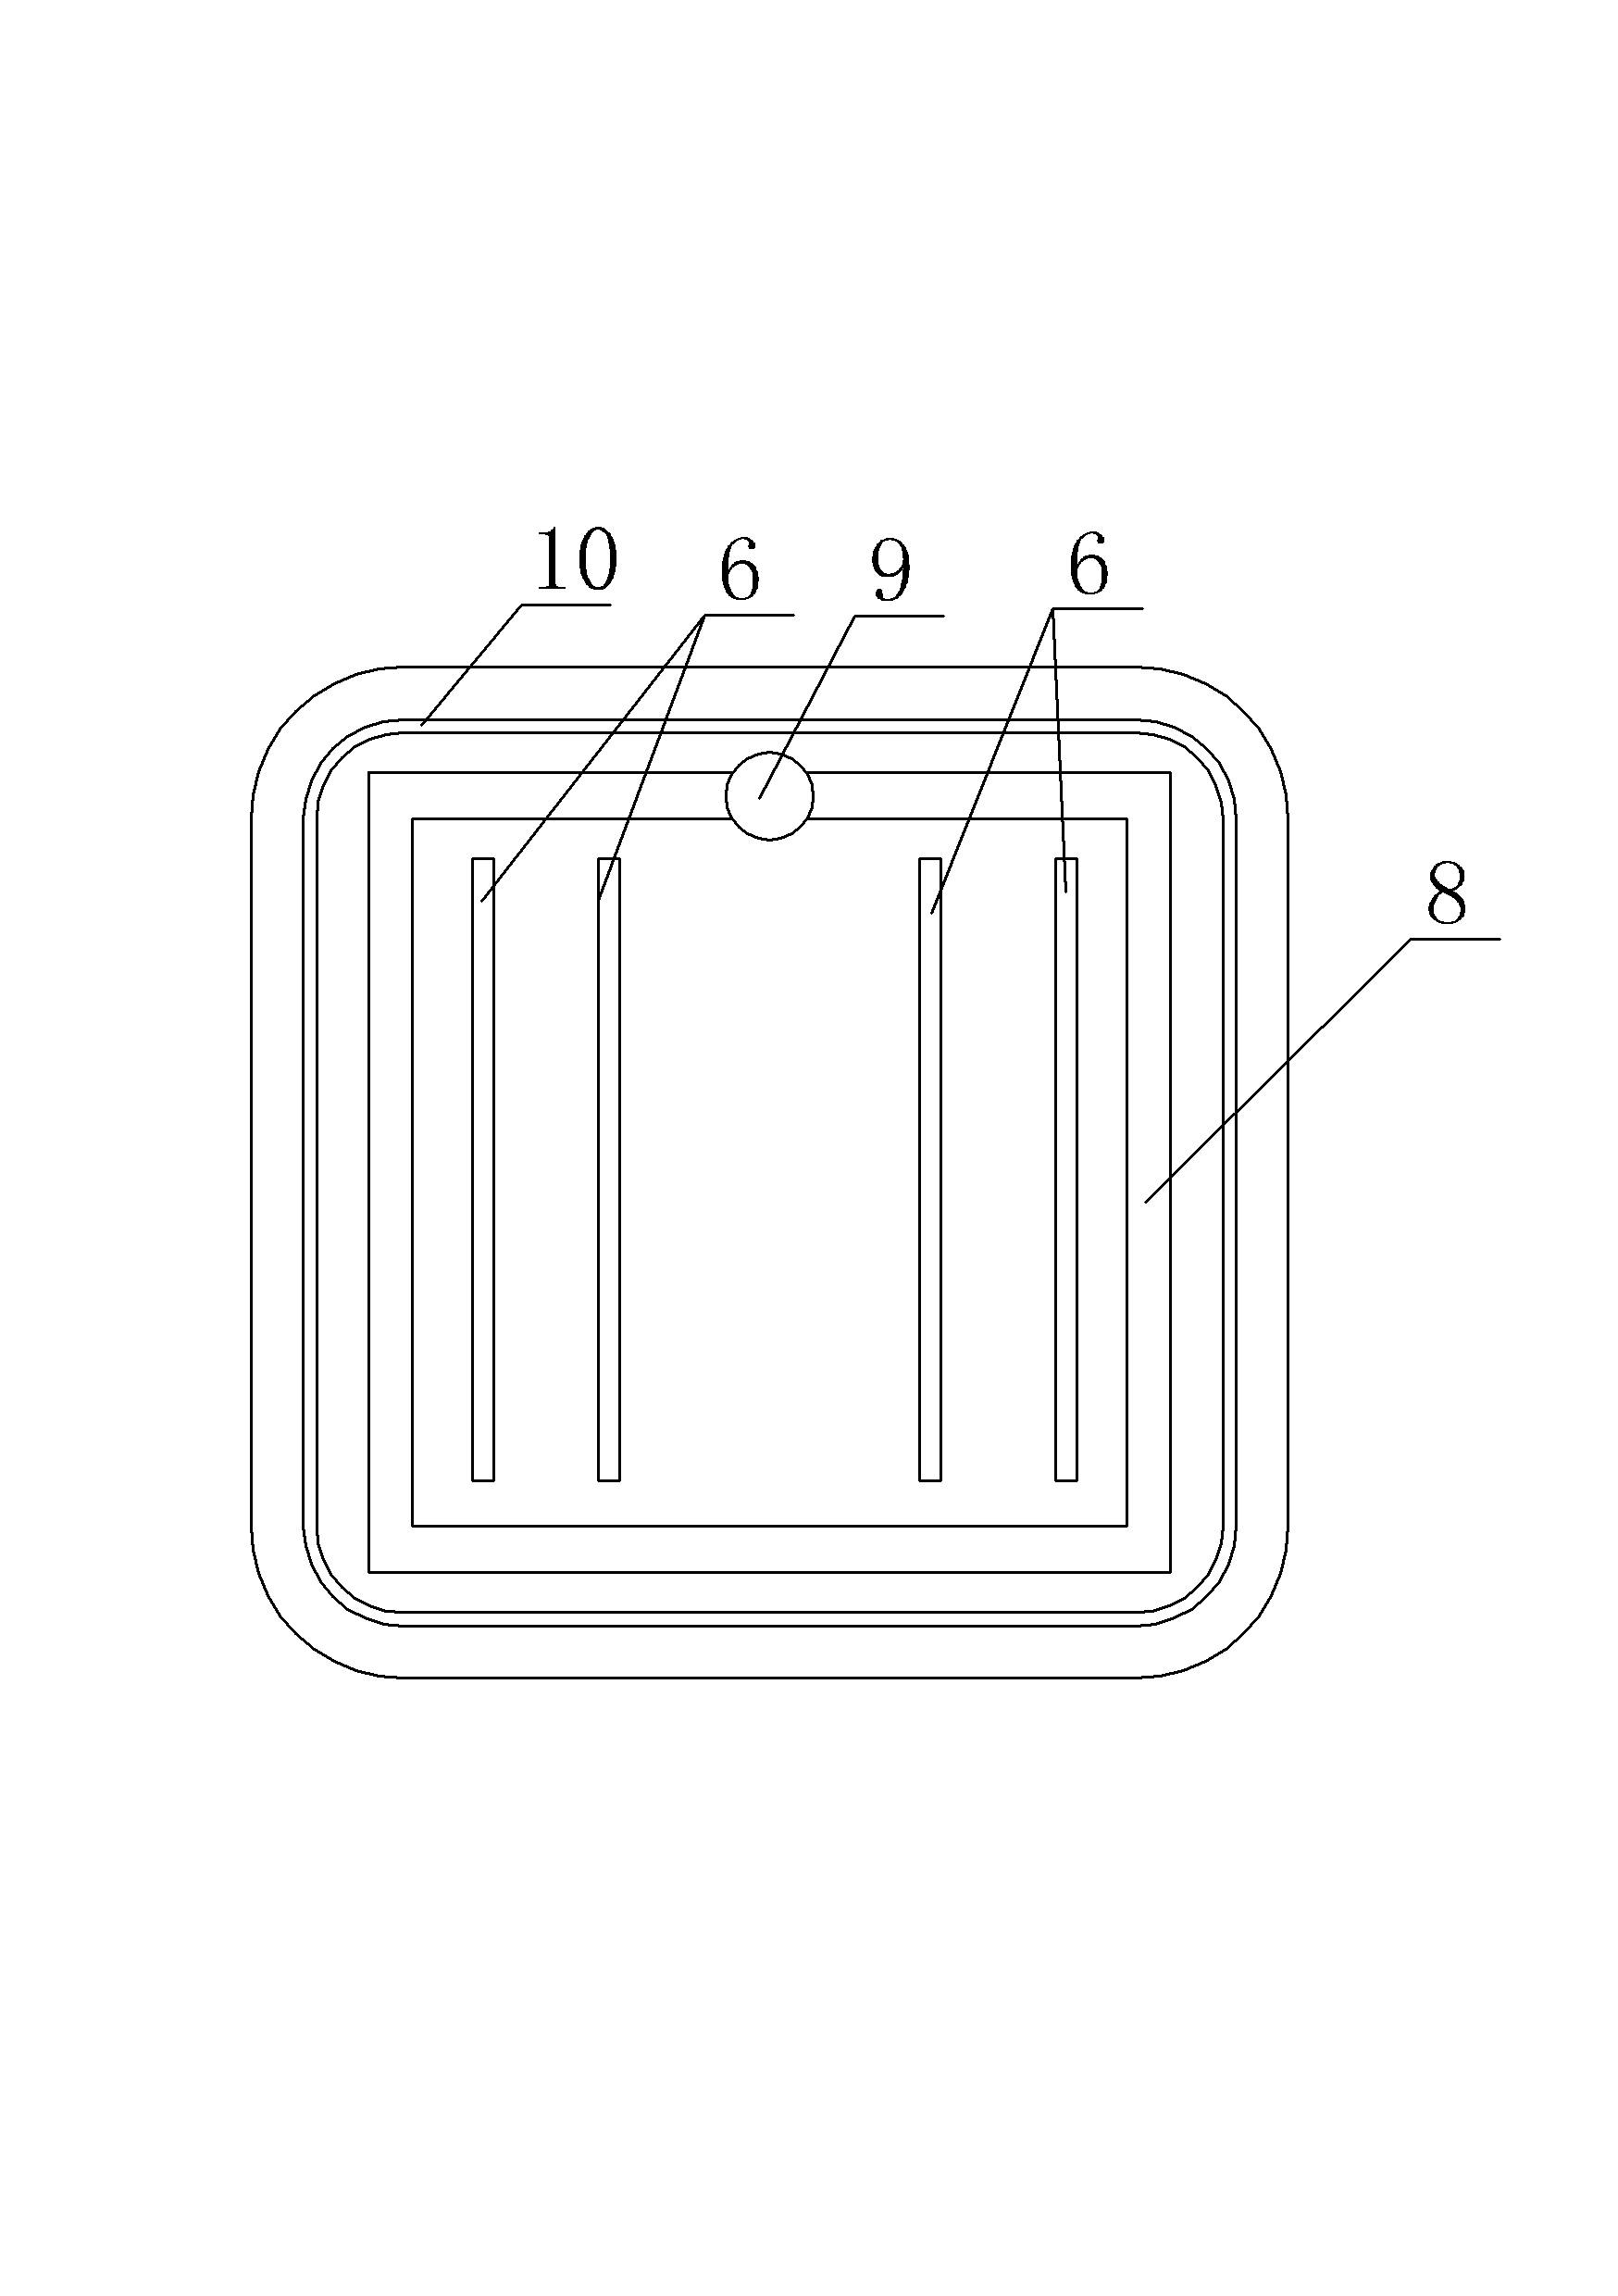 Multi-channel water-cooling device structure of computer CPU (Central Processing Unit)